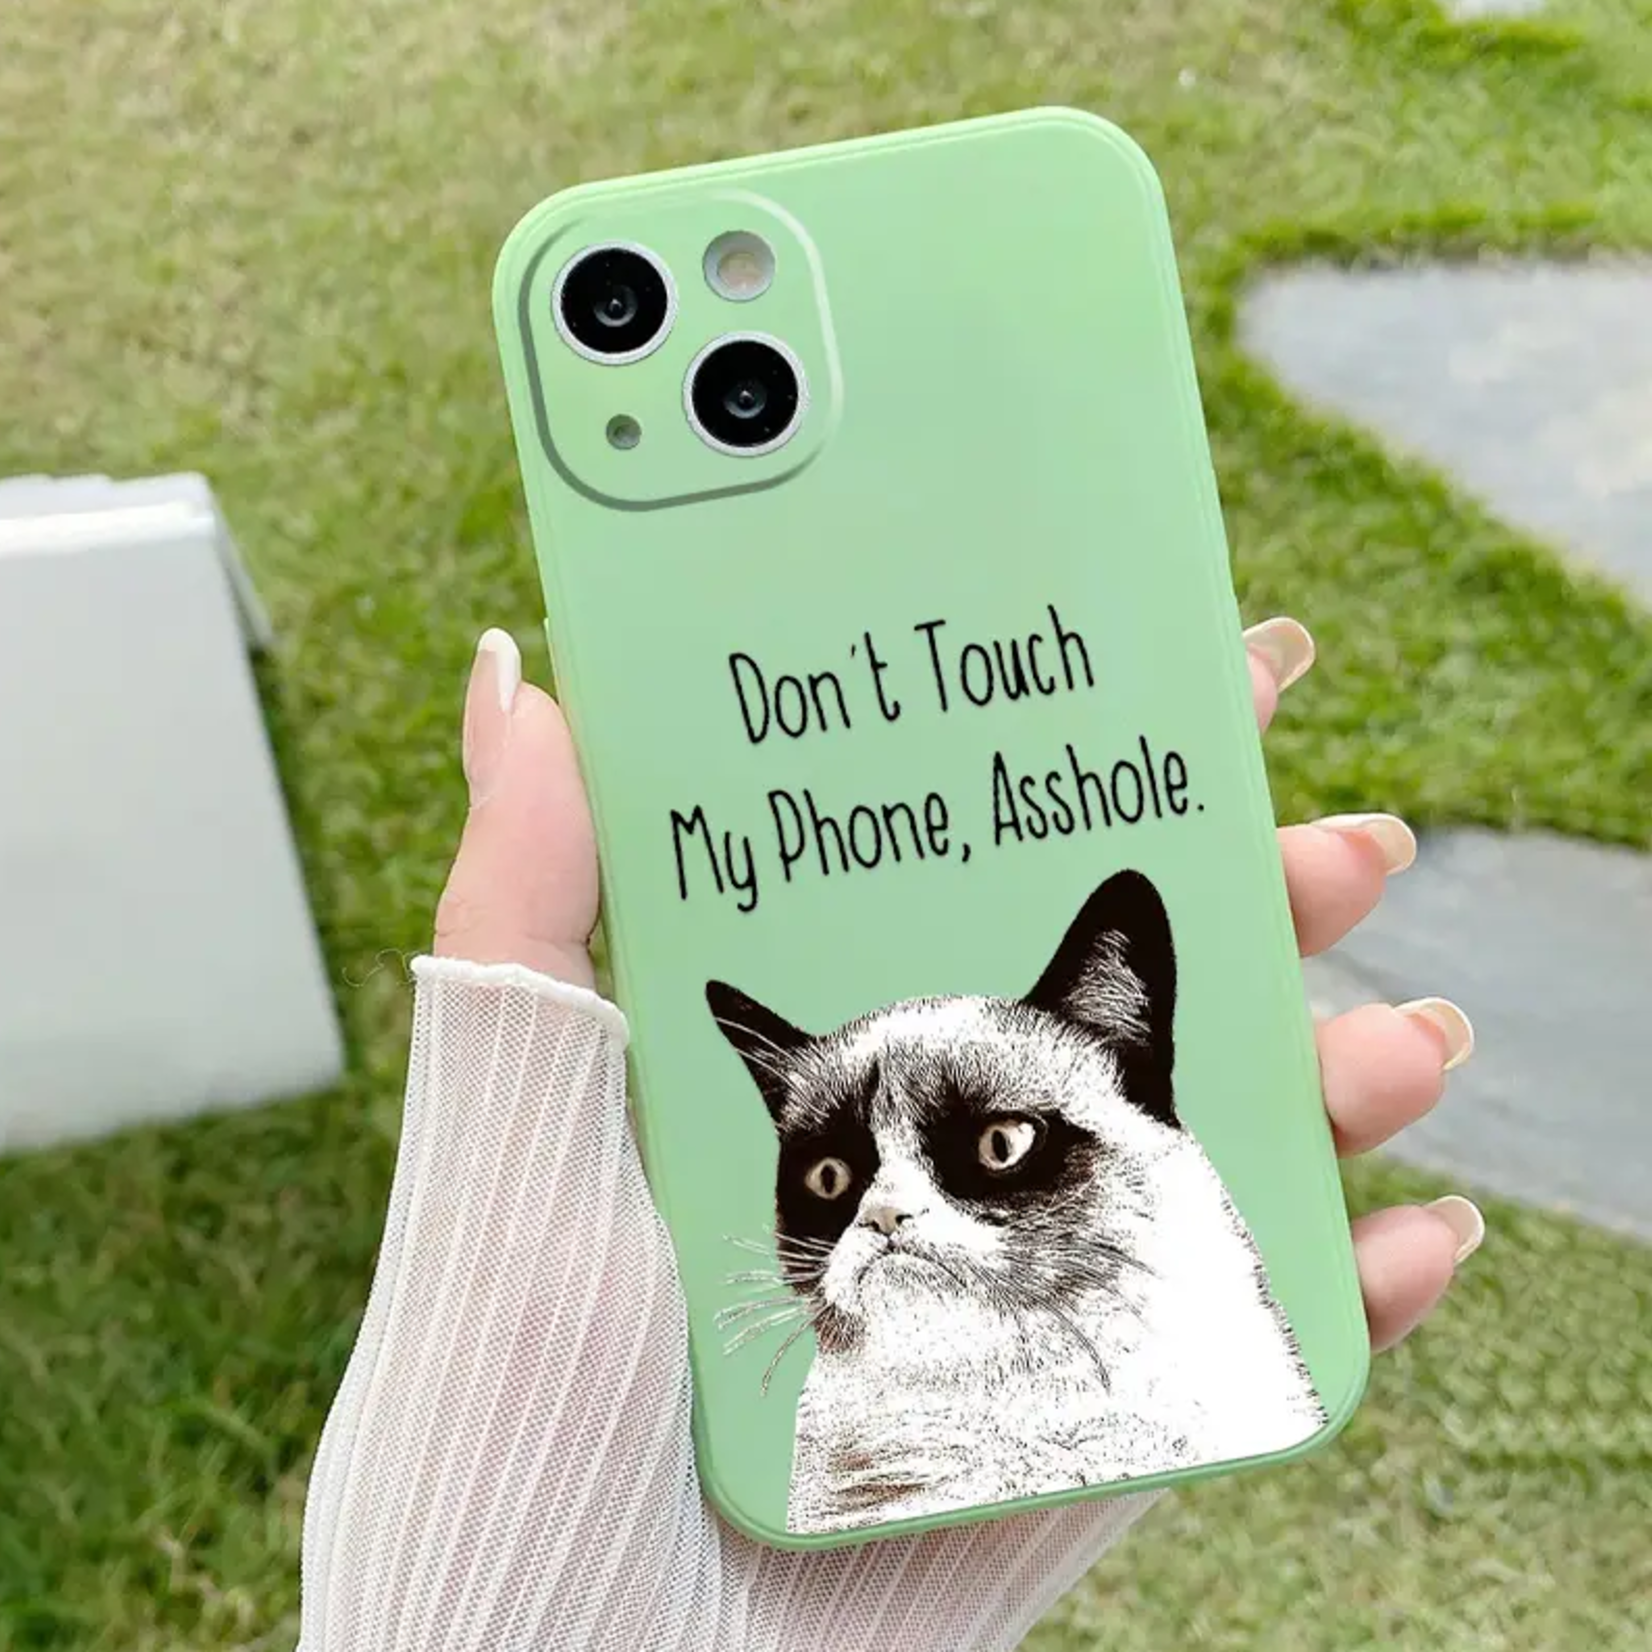 Apple Don't touch my phone asshole for iPhone 13